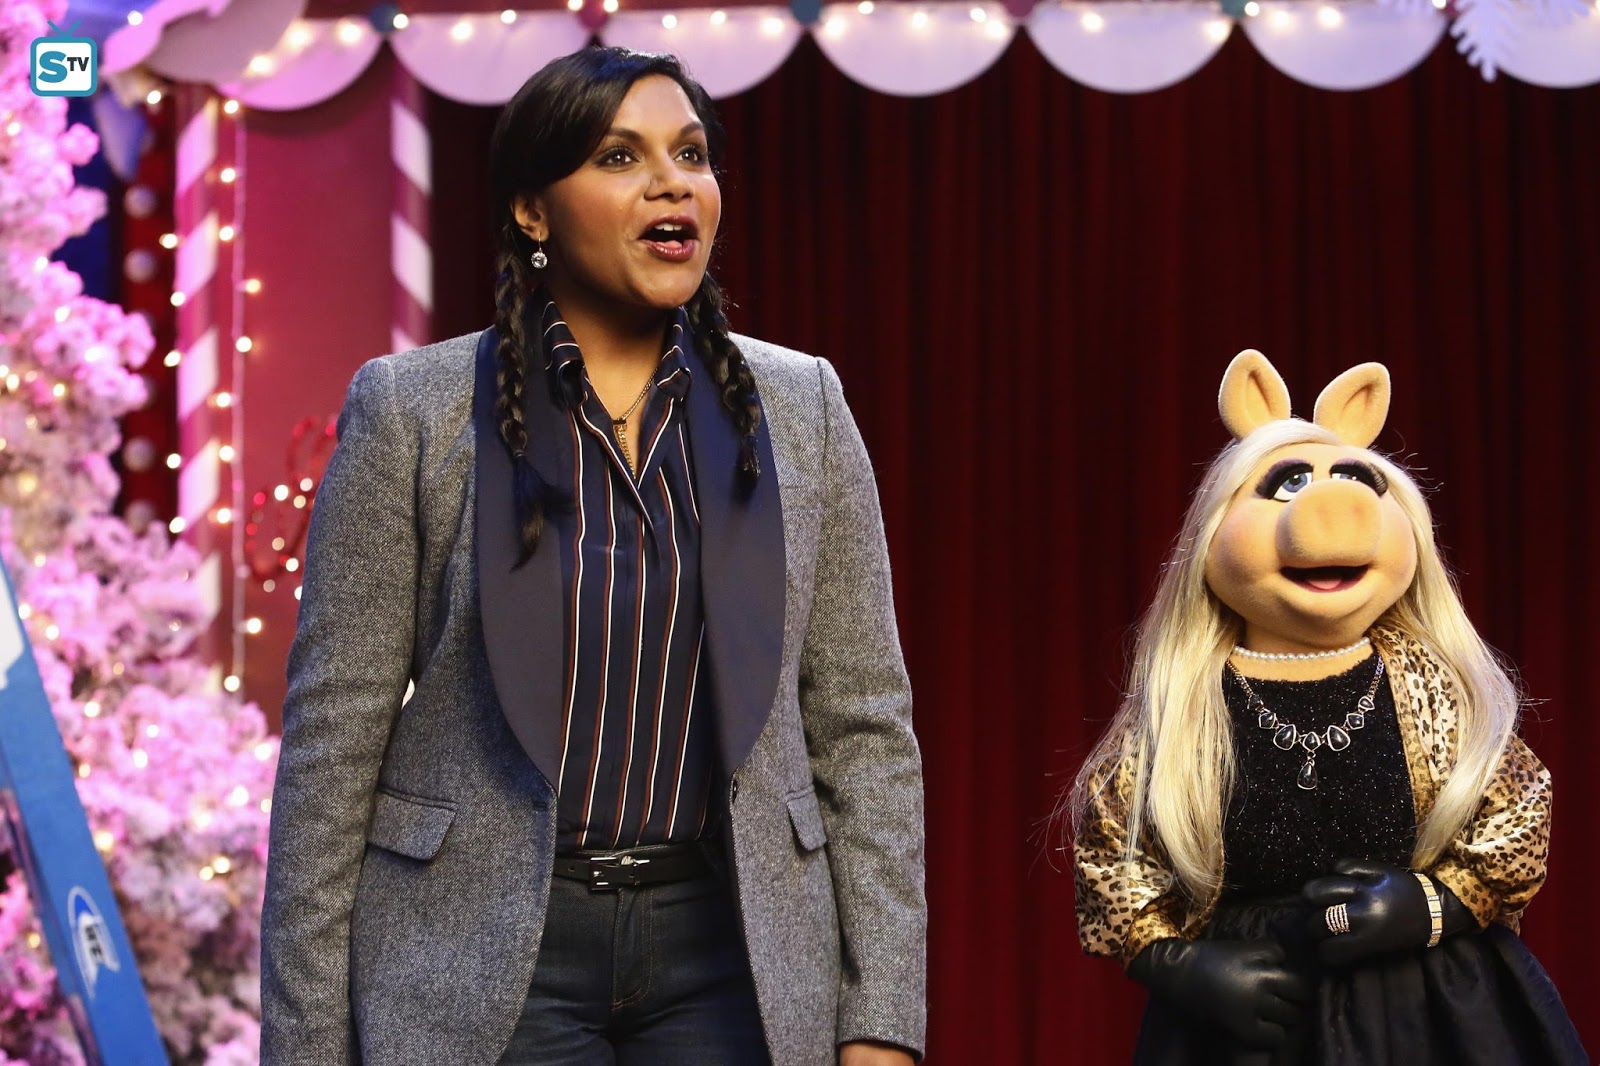 The Muppets - Episode 1.10 - Single All the Way (Winter Finale) - Promo & Promotional Photos